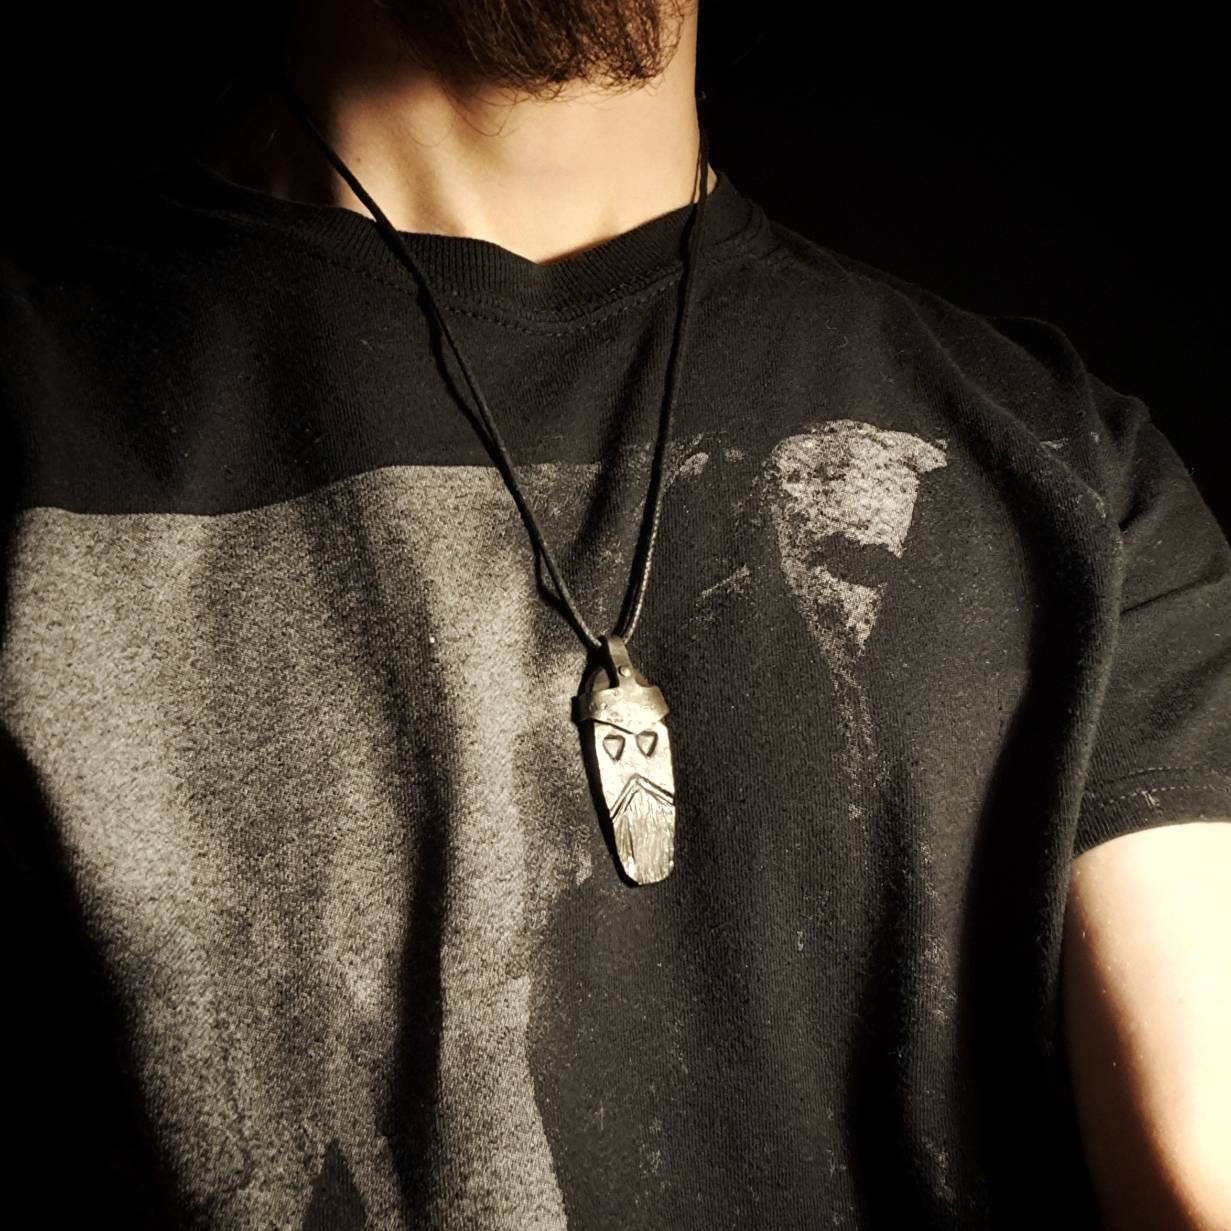 model wearing a norse god thor pendant